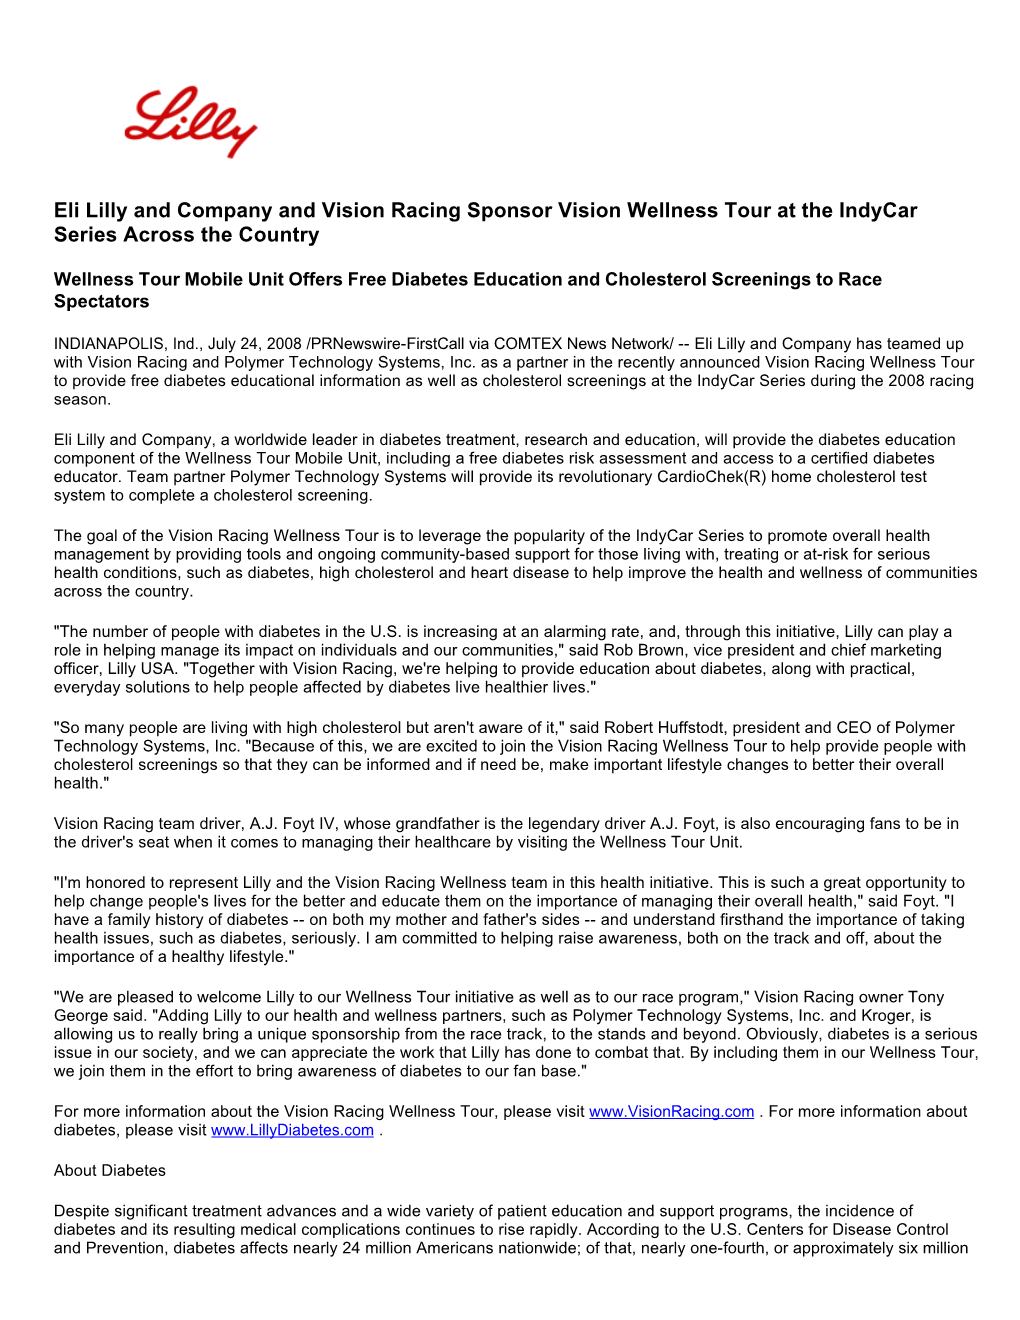 Eli Lilly and Company and Vision Racing Sponsor Vision Wellness Tour at the Indycar Series Across the Country